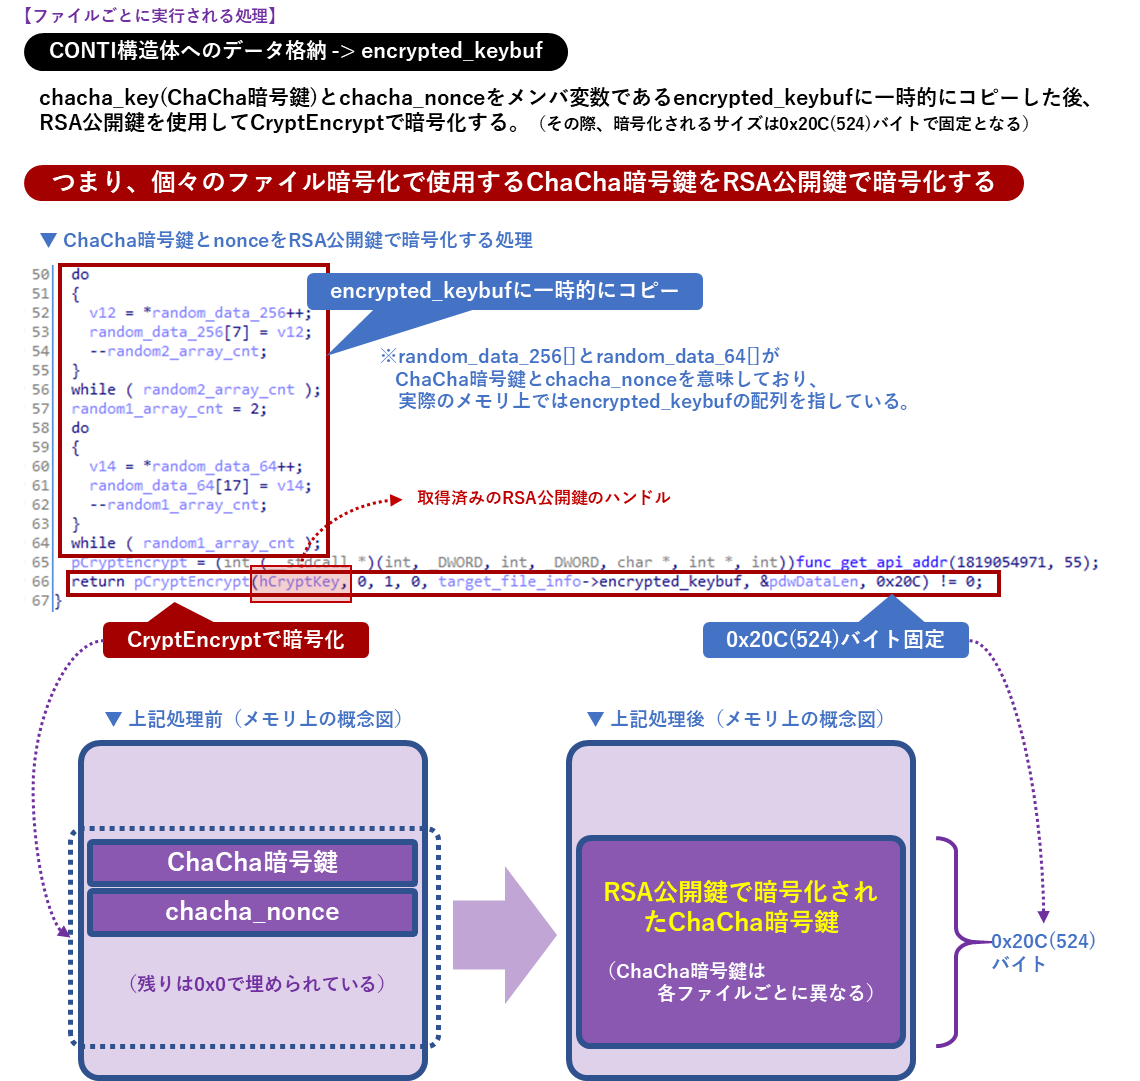 conti-ransomware_fig053.png